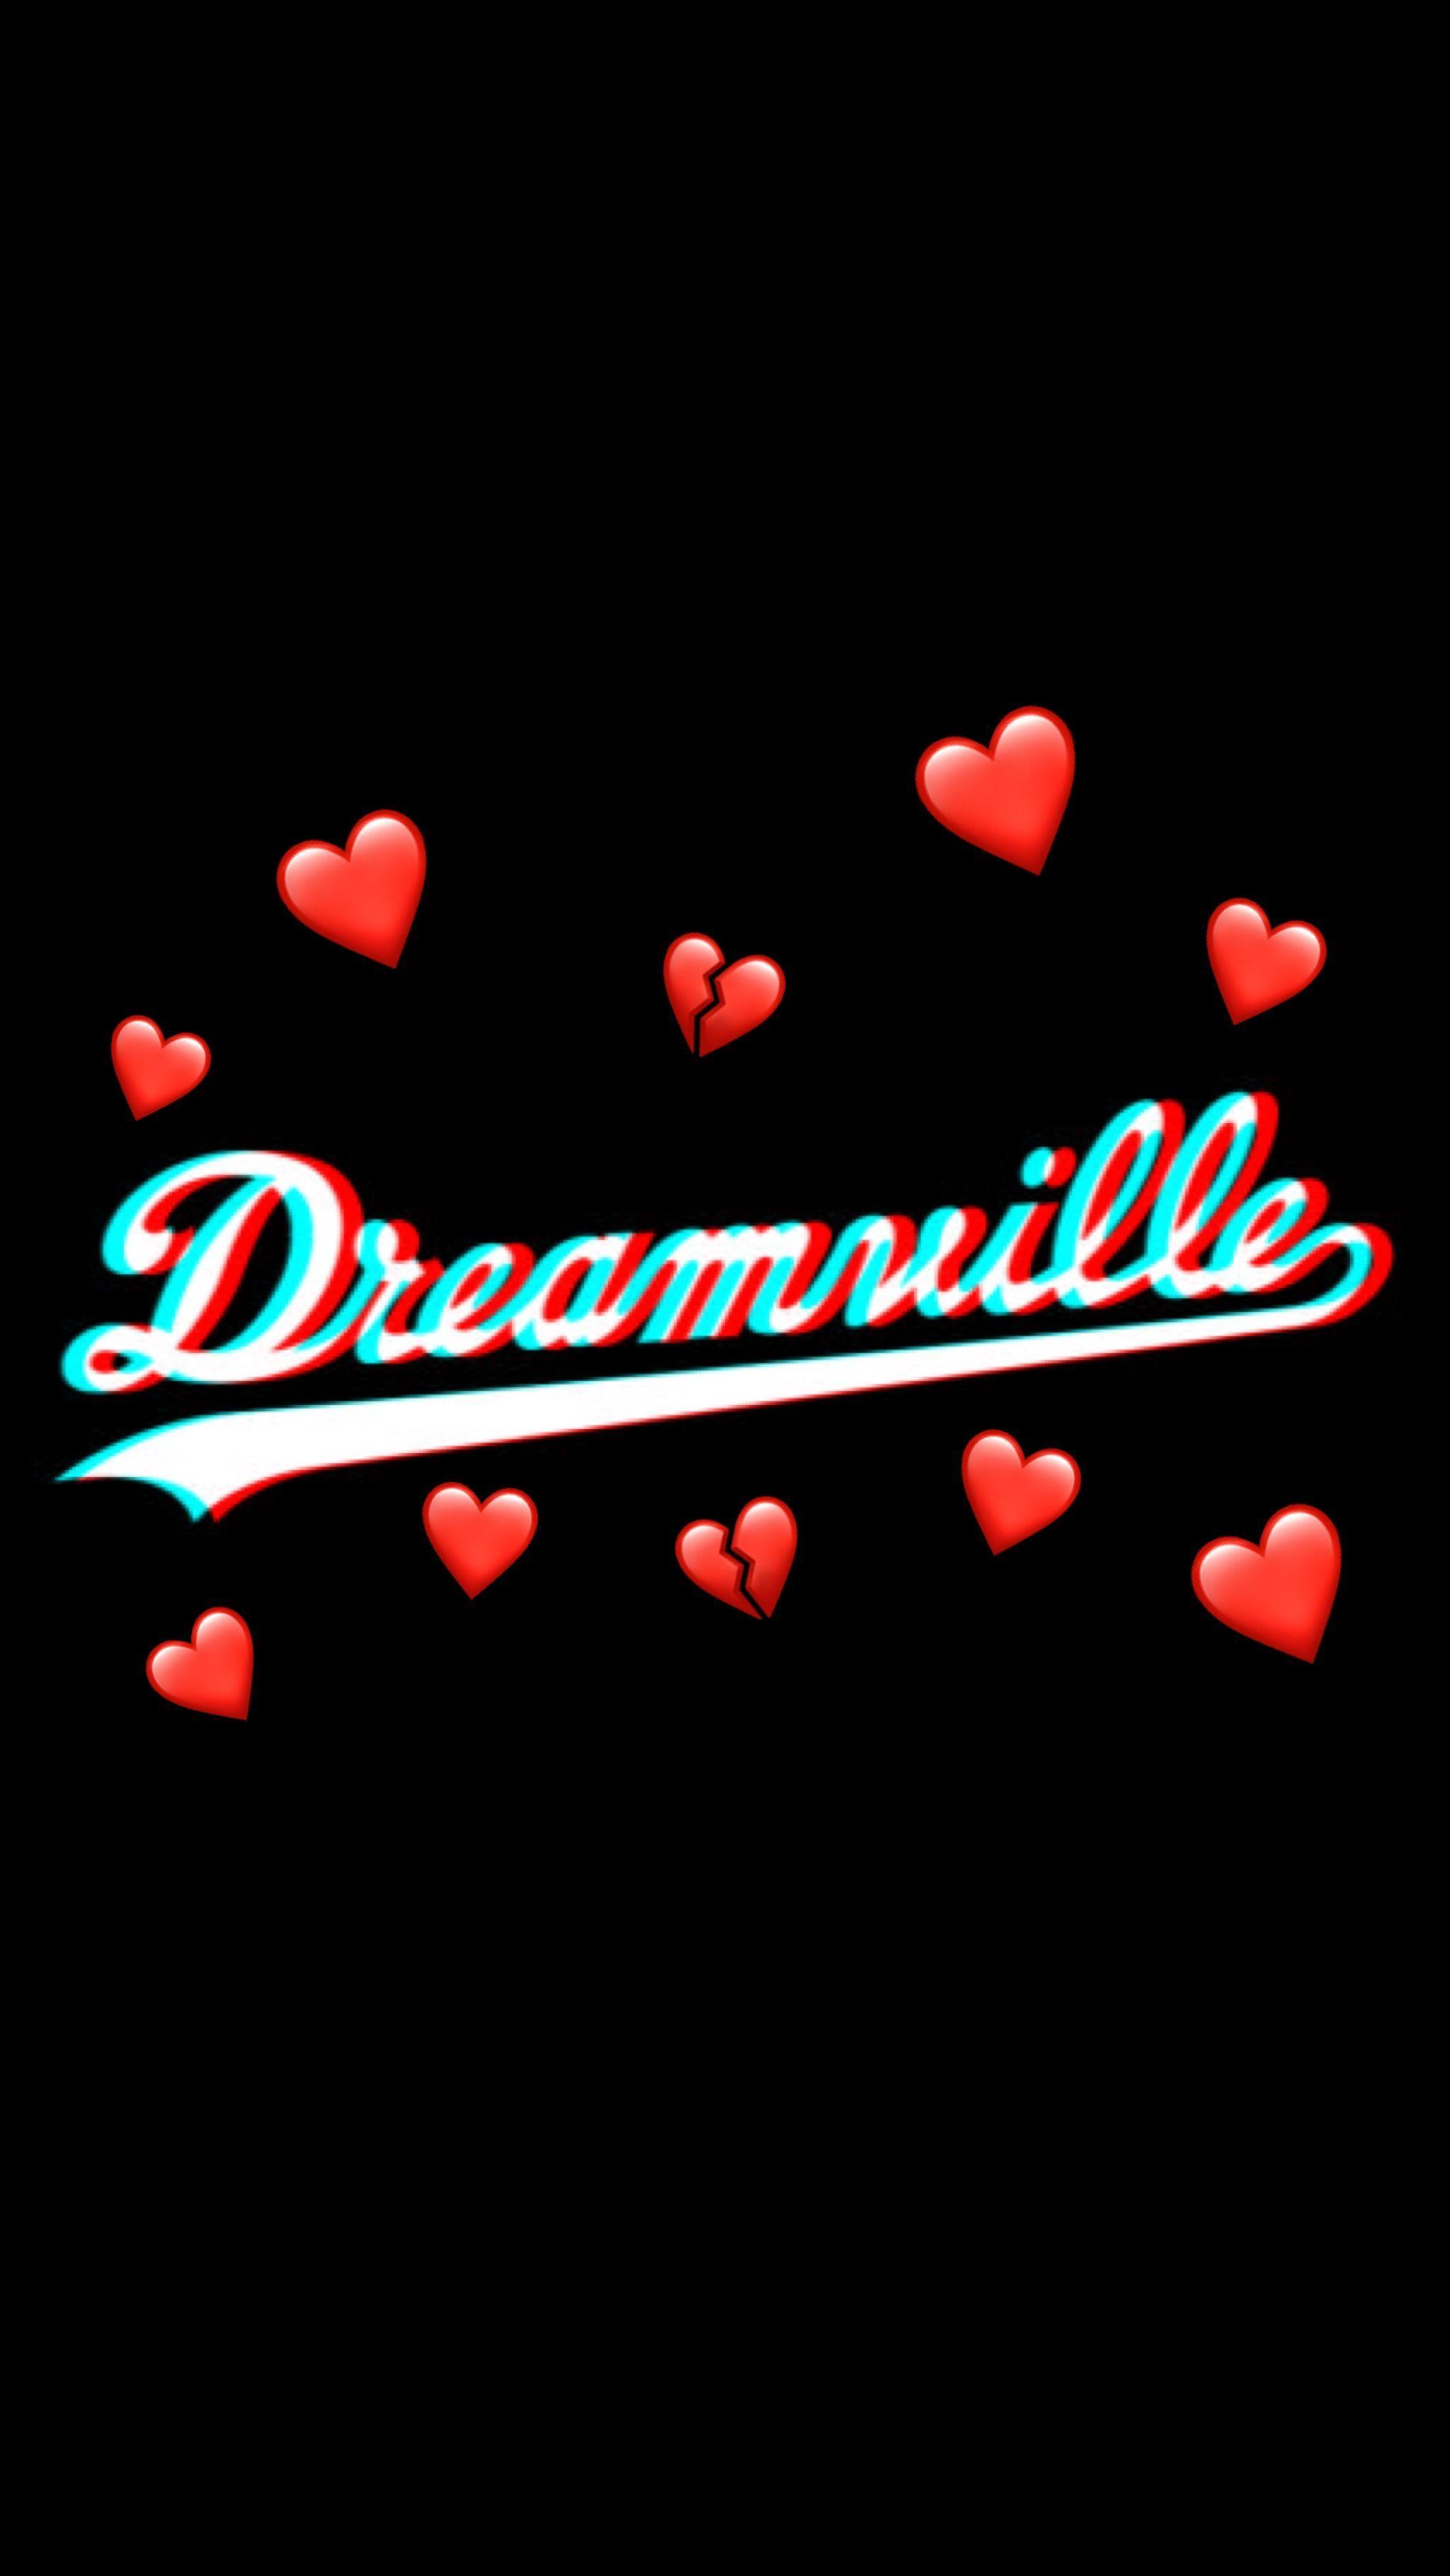 Dreamville x Adobe Behind The Forest Hills Drive Tour  Dreamville Records